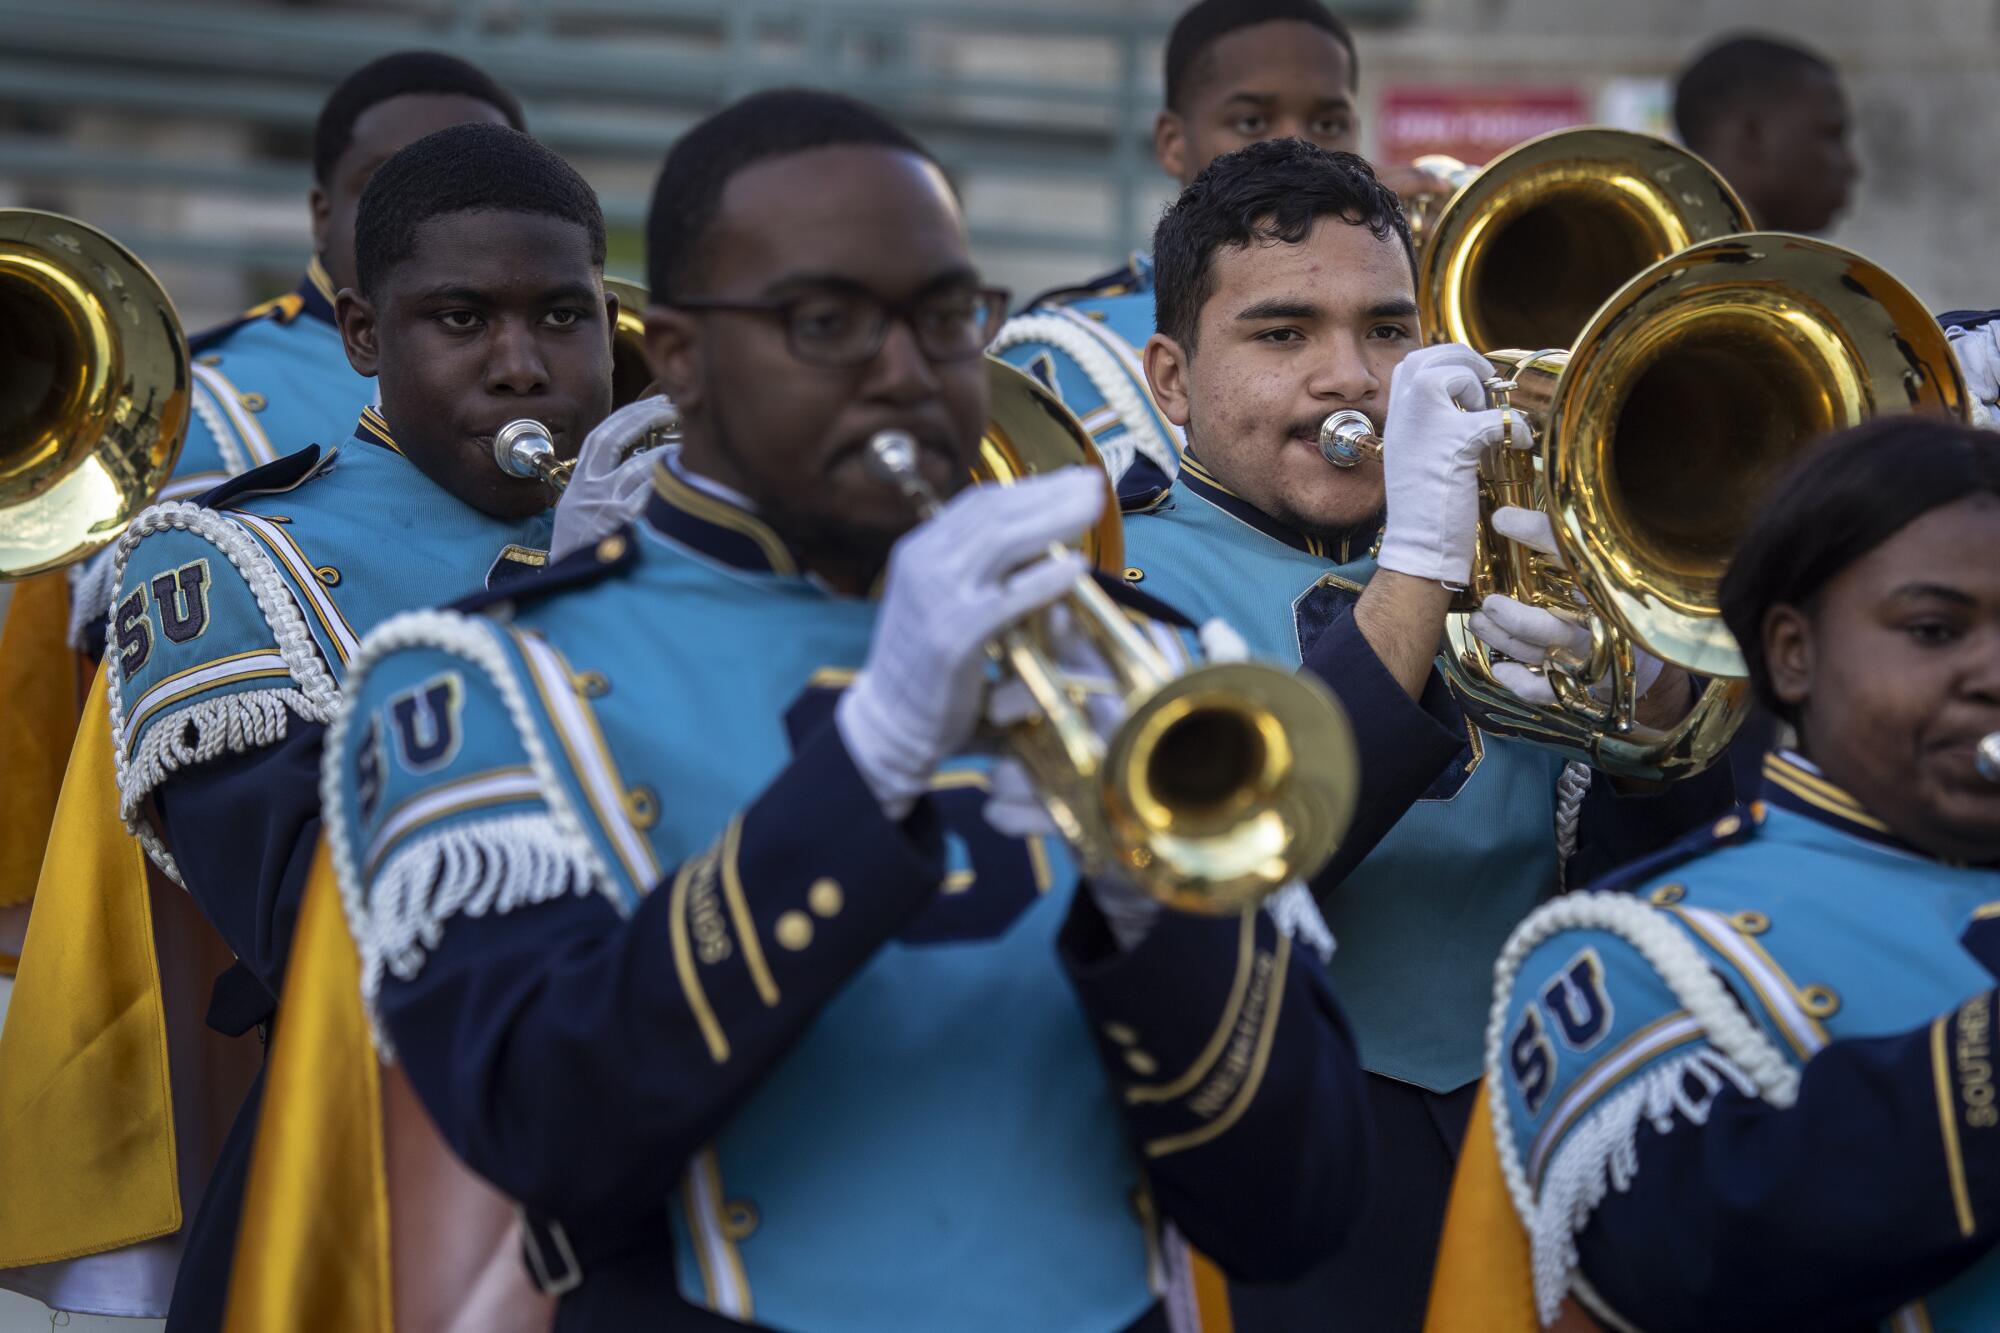  Zaid Soberanis-Ramos, right, warms up with his 200-plus member squad, the Southern University marching band, a.k.a. the “Human Jukebox,” at Pasadena City College.